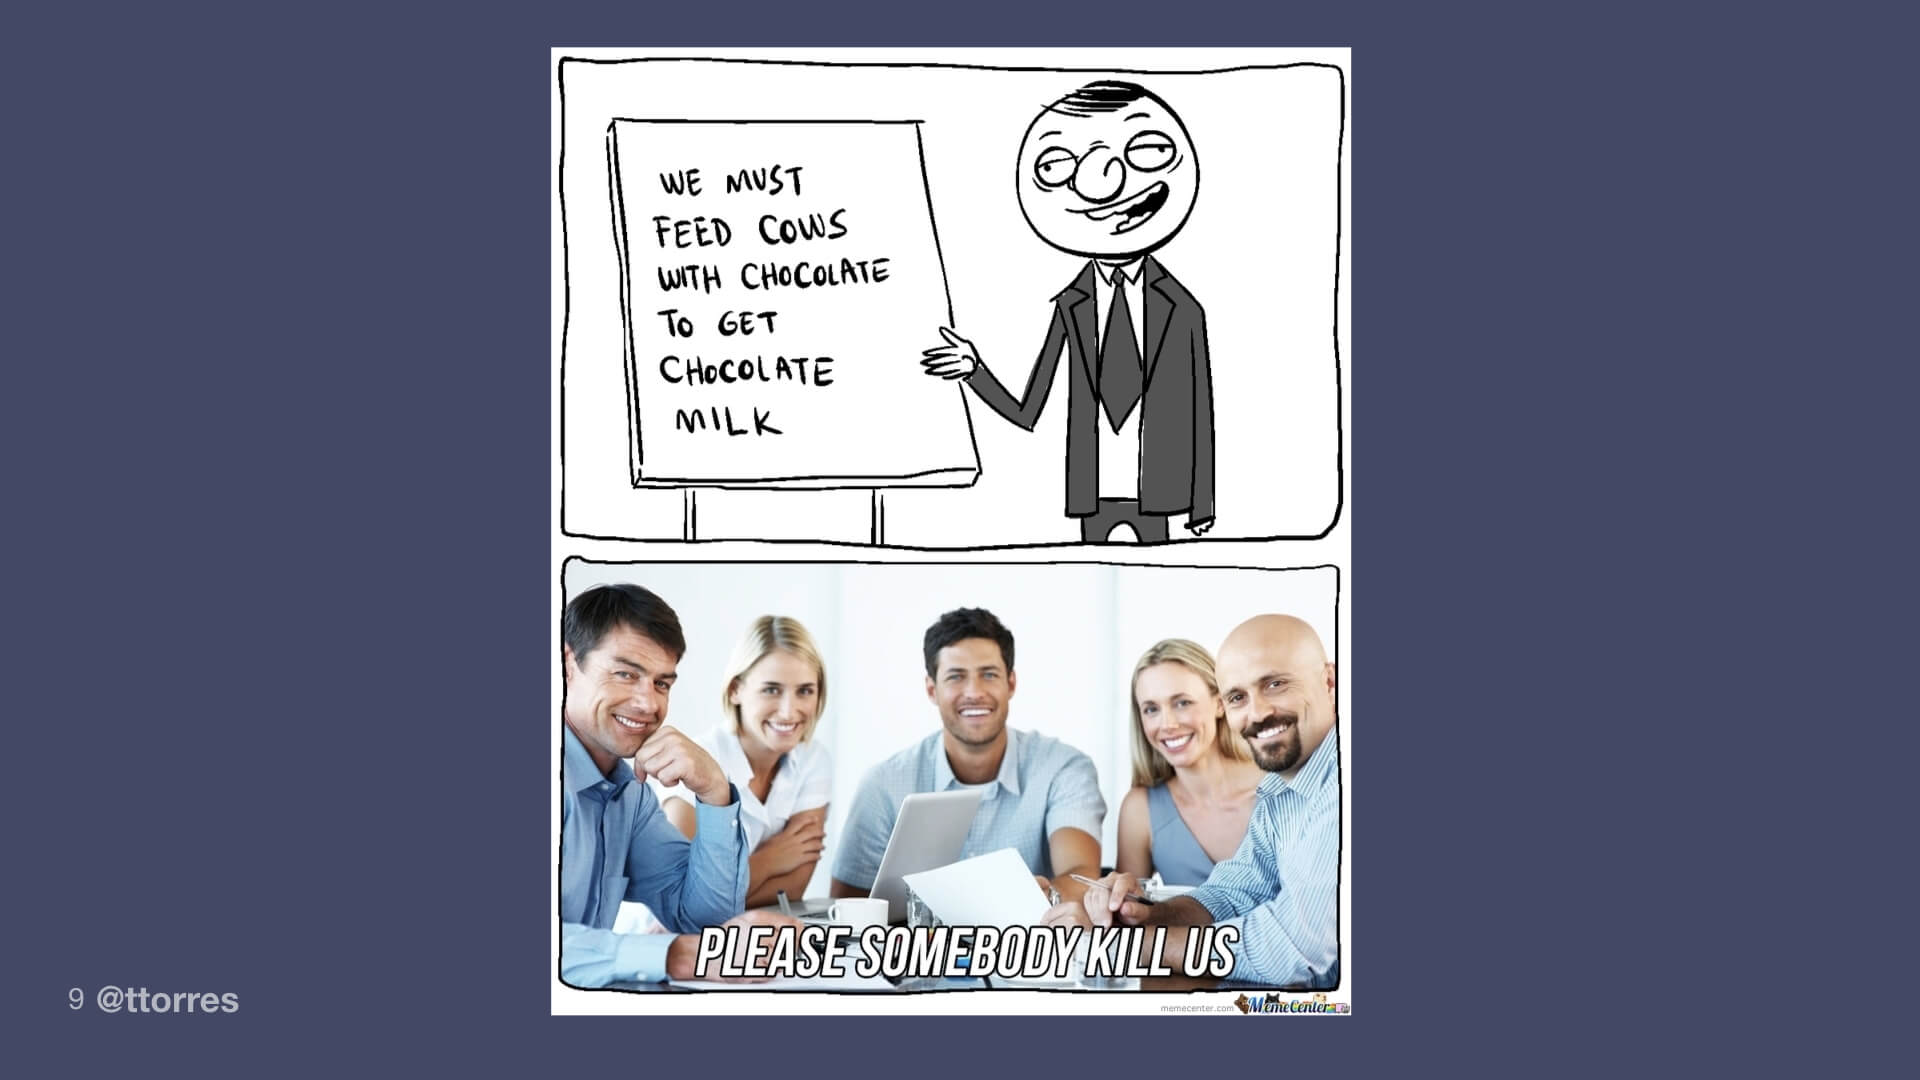 The top image is a cartoon of a man pointing at a sign that reads, "We must feed cows chocolate to get chocolate milk." Below the cartoon of the man is a photo of a group of people smiling with text that reads, "Please somebody kill us."